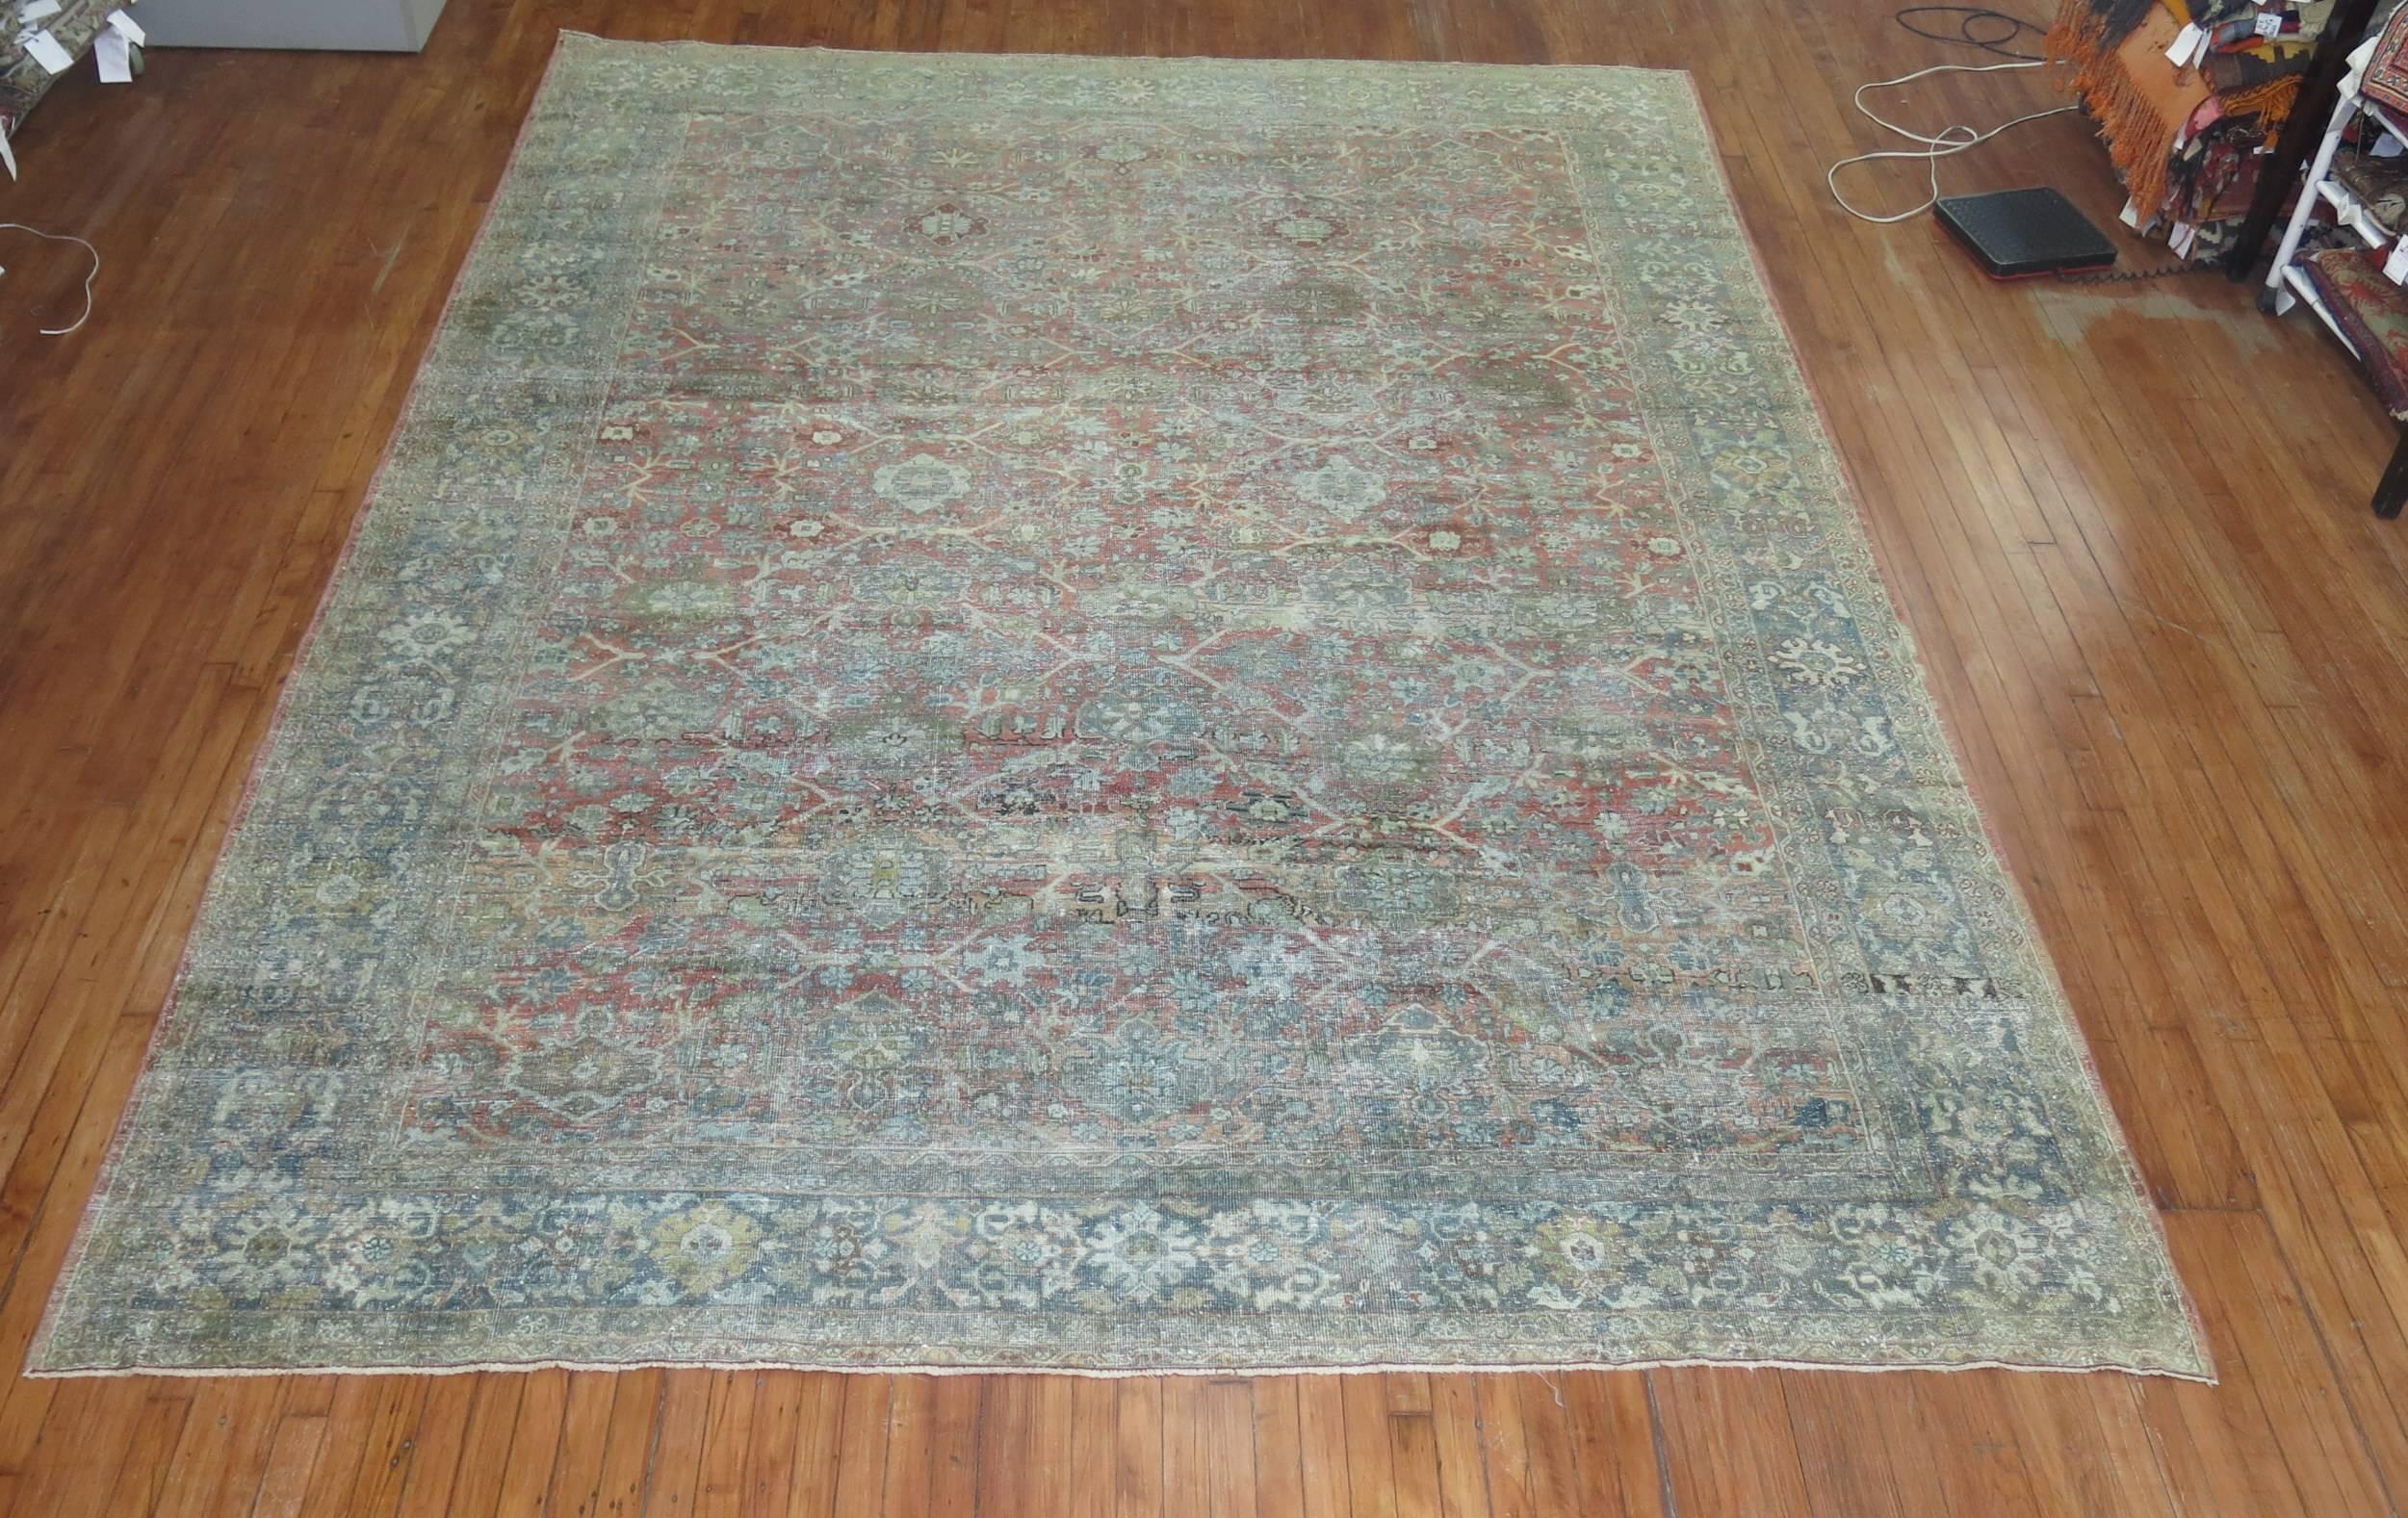 Room size early 20th century antique Persian Mahal rug with an all-over design in faded terracotta's and sea foam green. Really chic!

Measures: 9'4